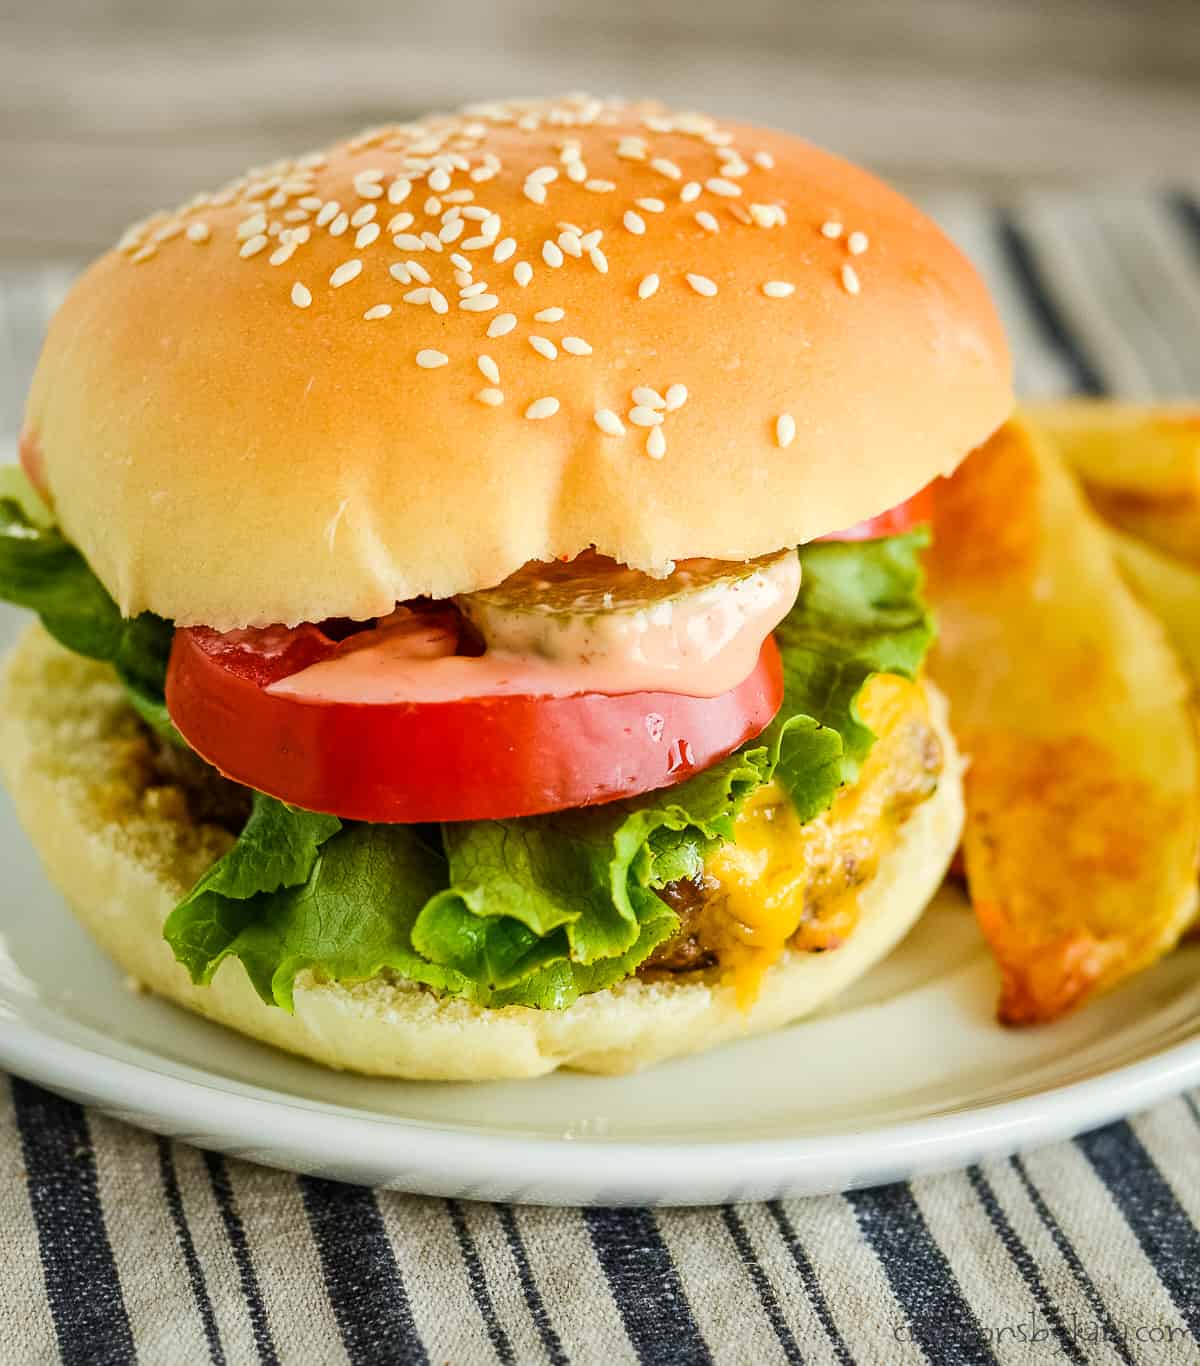 hidden valley ranch burger with cheese, lettuce, and tomato